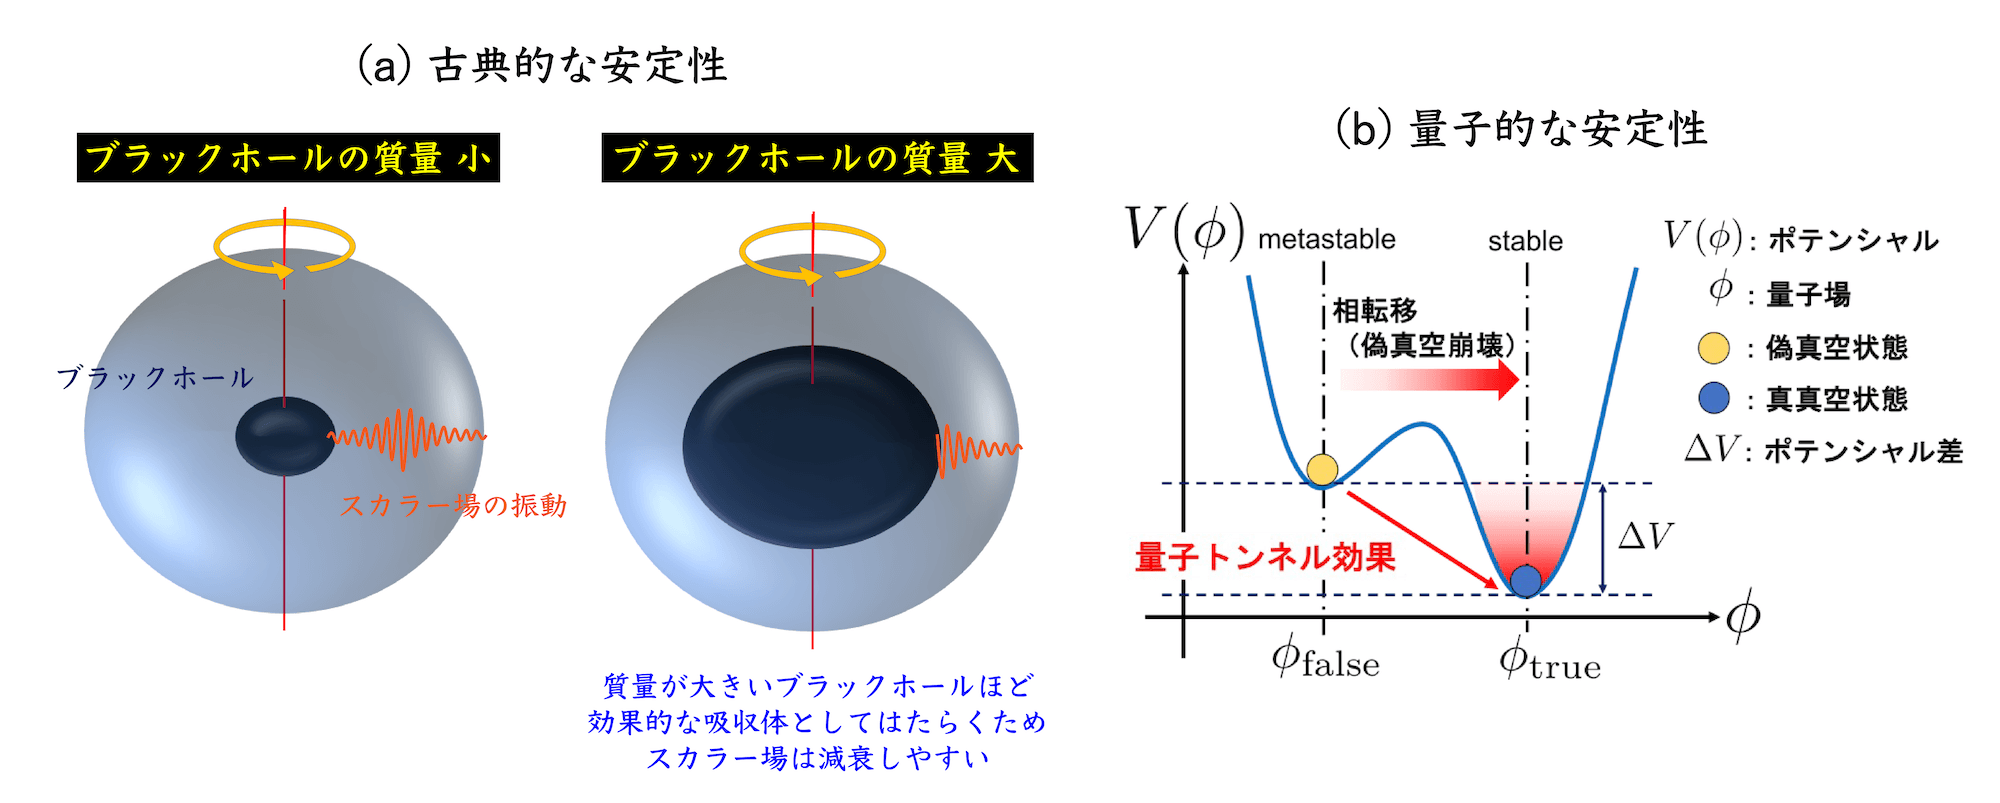 <dfn class="fig">図8</dfn>：<span class="qrinews-figure-title">ブラックホールまわりの時空の安定性</span>　詳細は<a href="#foot7" class="link-to-lower-part"><cite class="article" lang="ja">脚注7</cite></a>を参照。上田さんよりご提供いただいた図を改変。